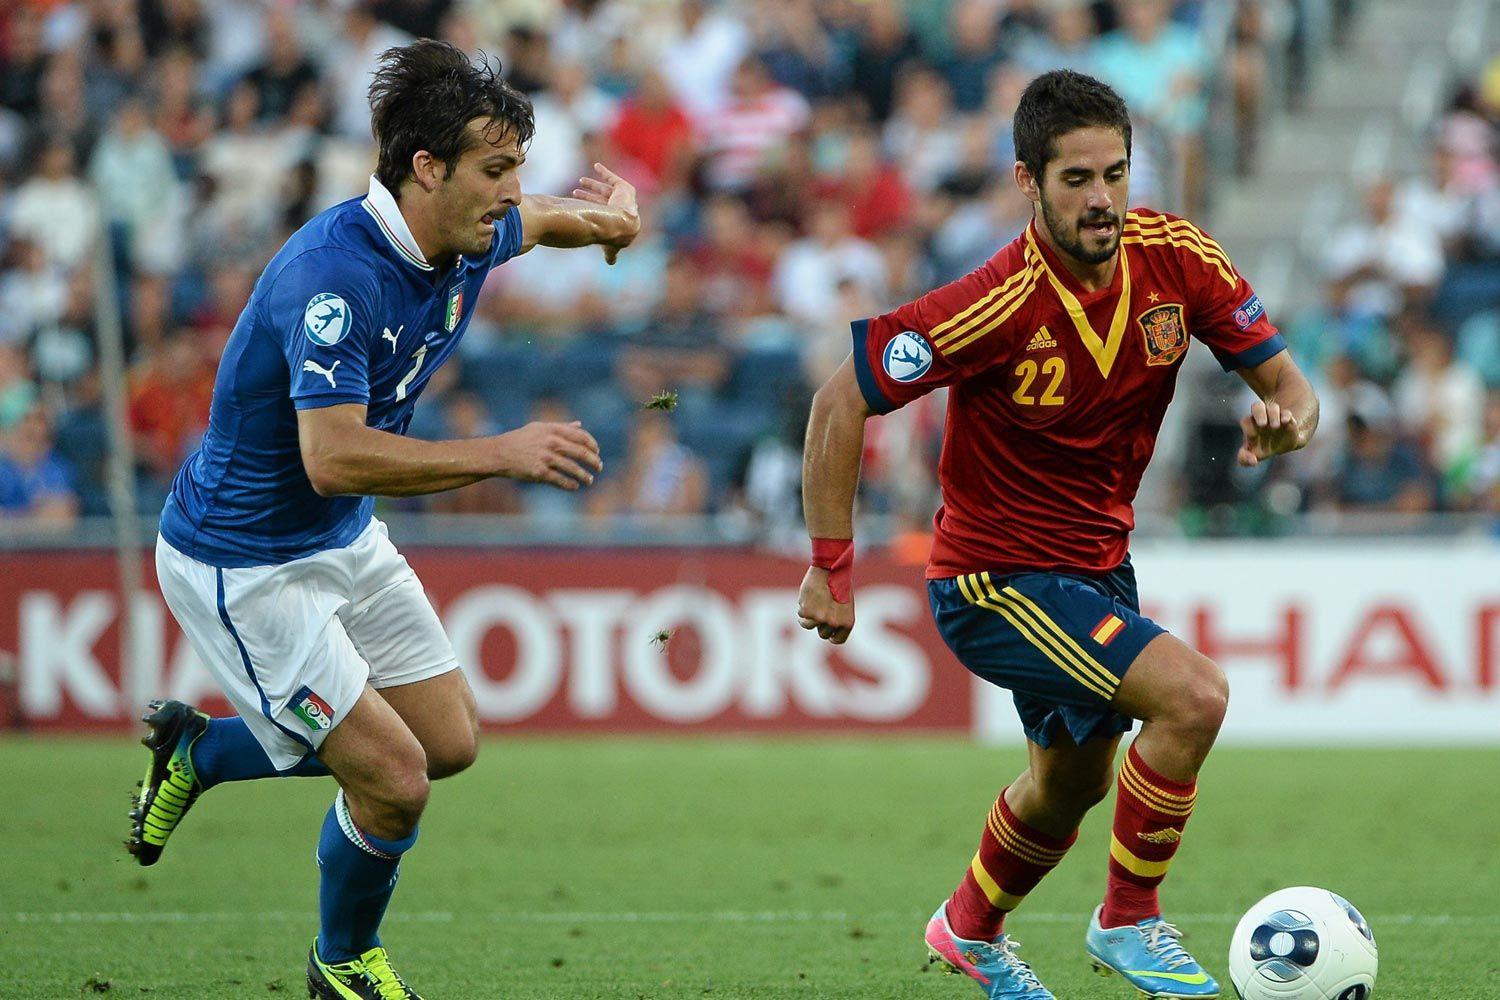 Isco Spain Under 21 free HD Wallpaper image. The Best Young